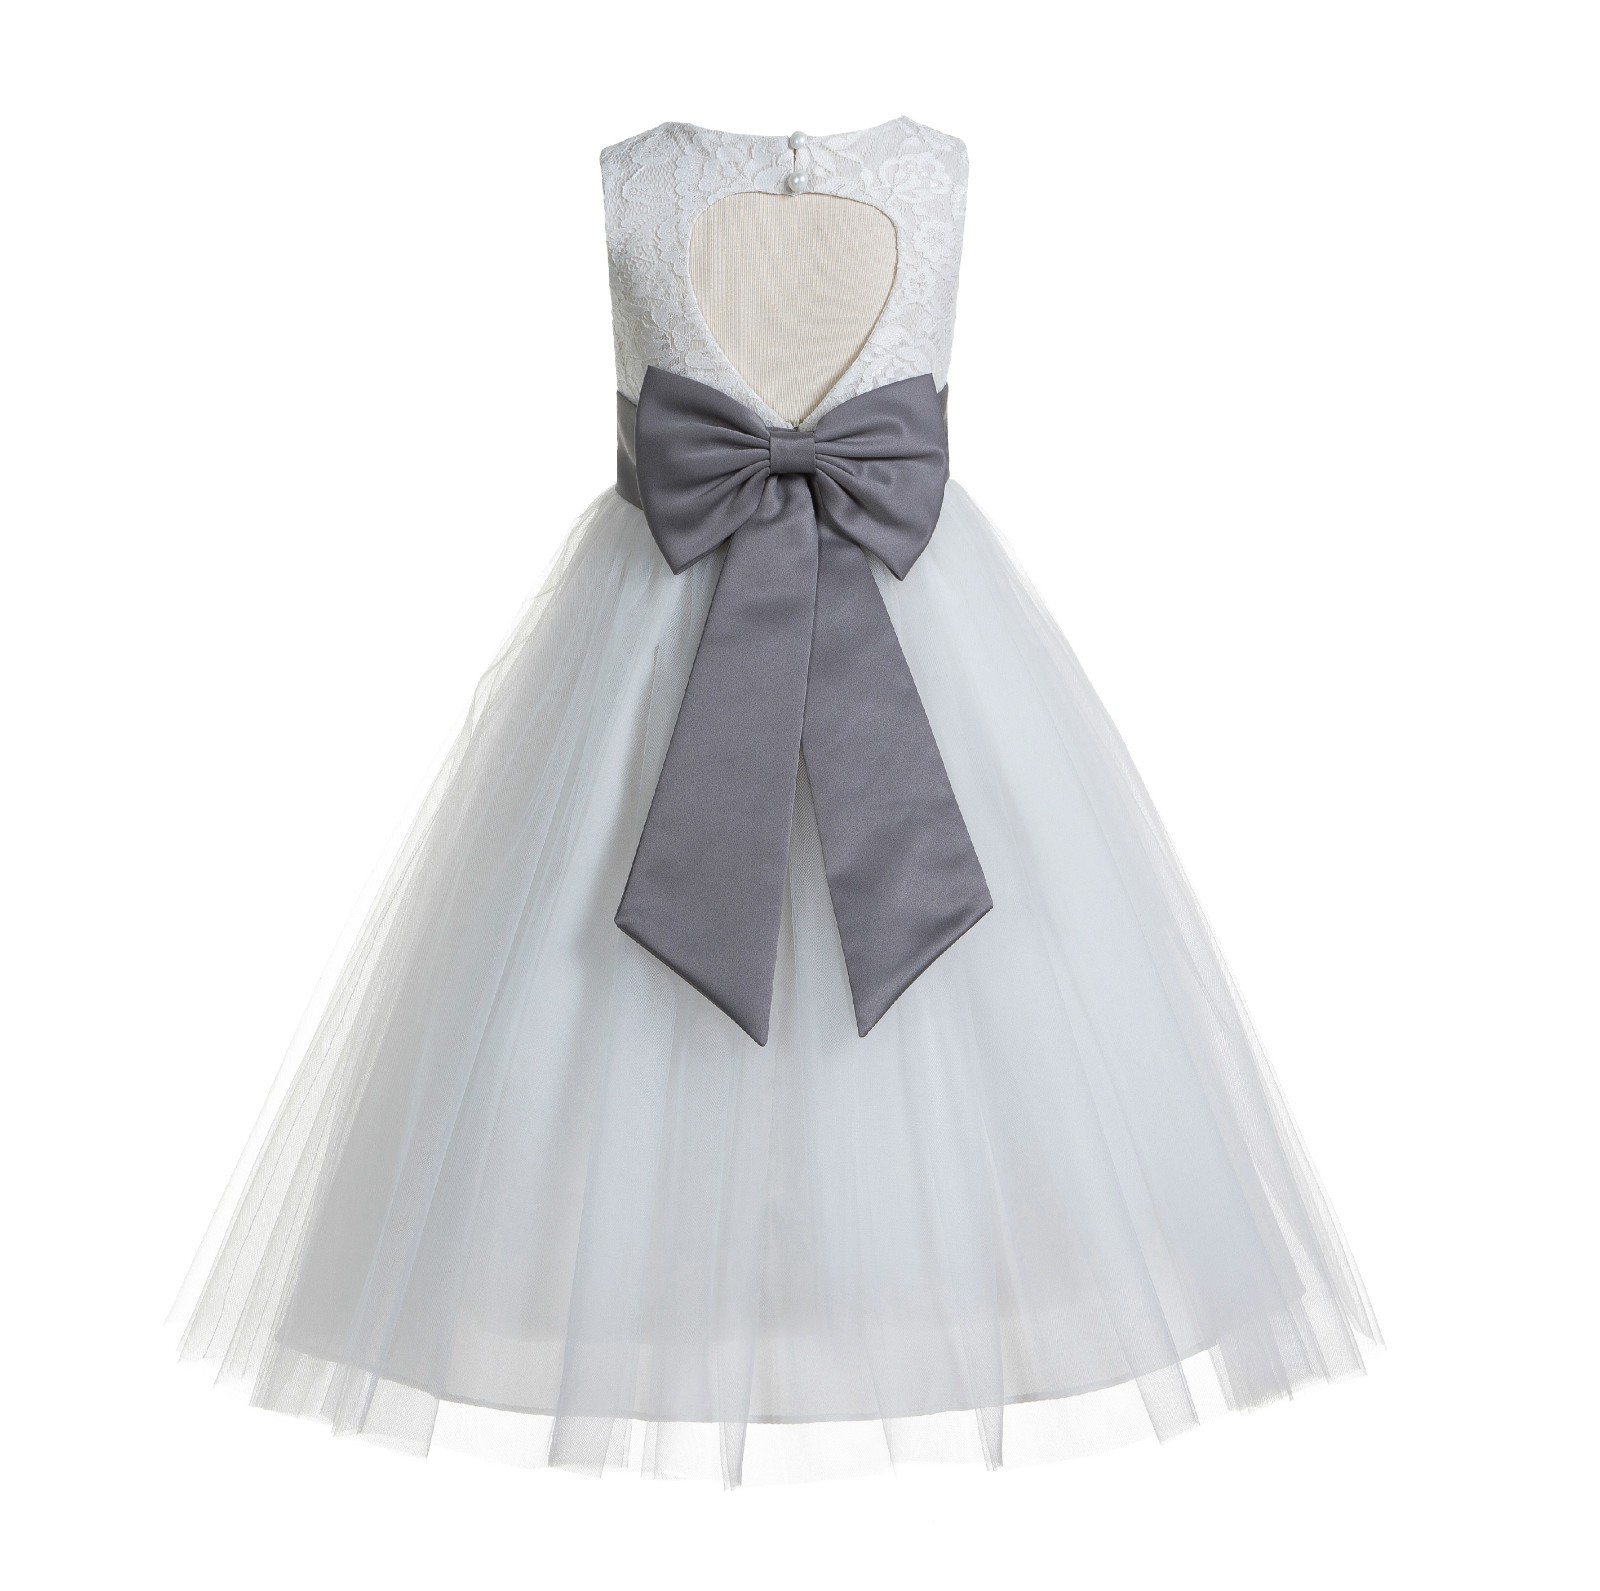 Ivory / Mercury Gray Floral Lace Heart Cutout Flower Girl Dress with Flower 172T